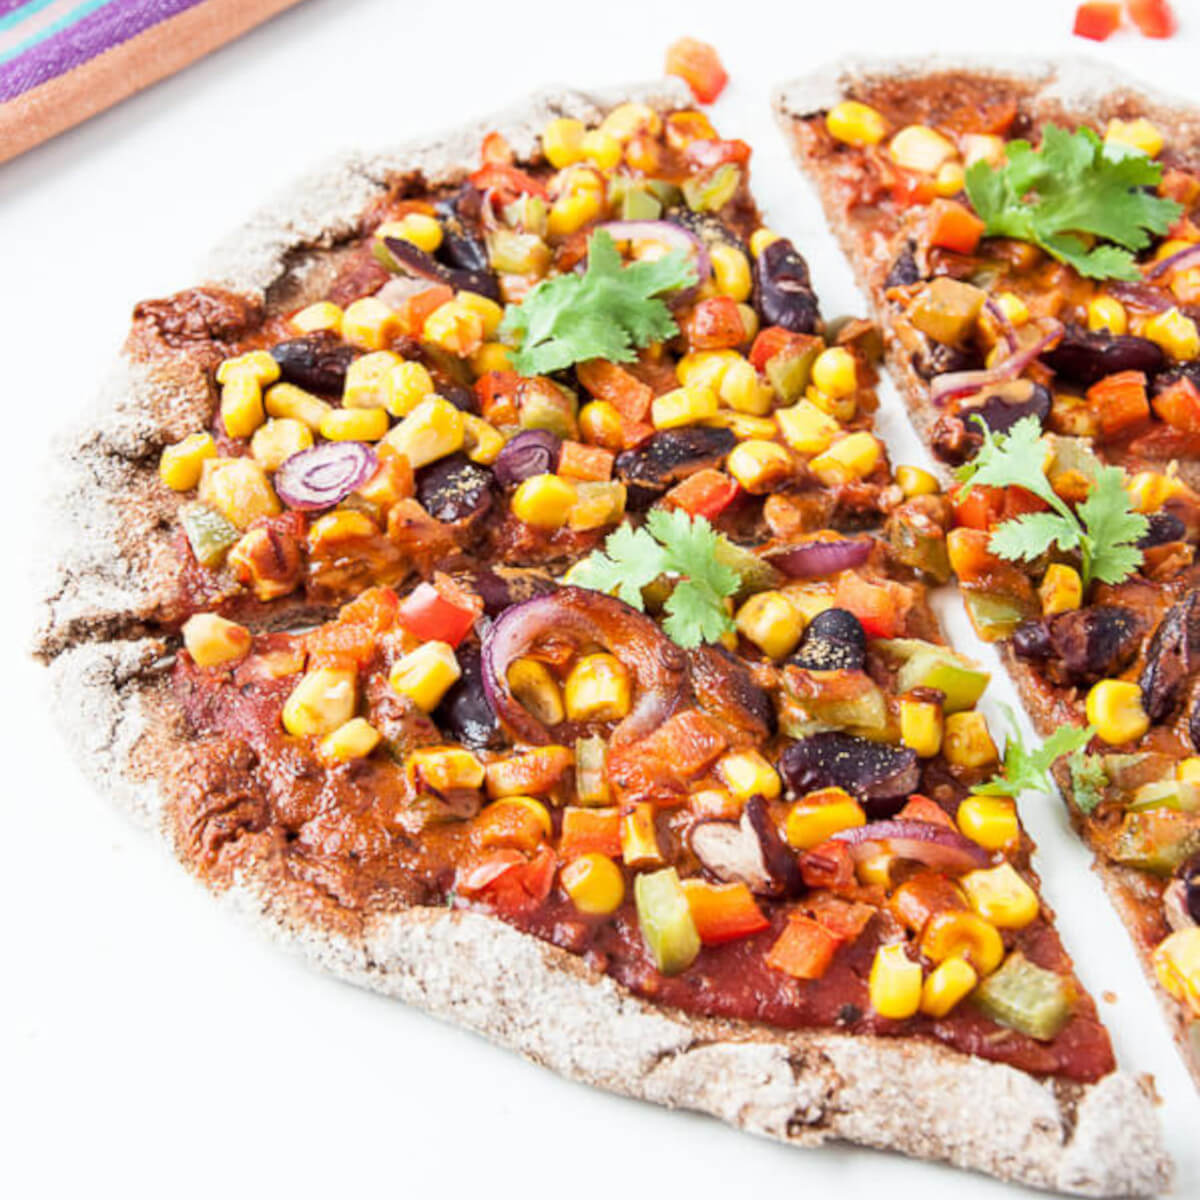 Spicy Chipotle Vegan Pizza Recipe with bell peppers, tomatoes, corn, beans and chipotle peppers - Vegan Family Recipes